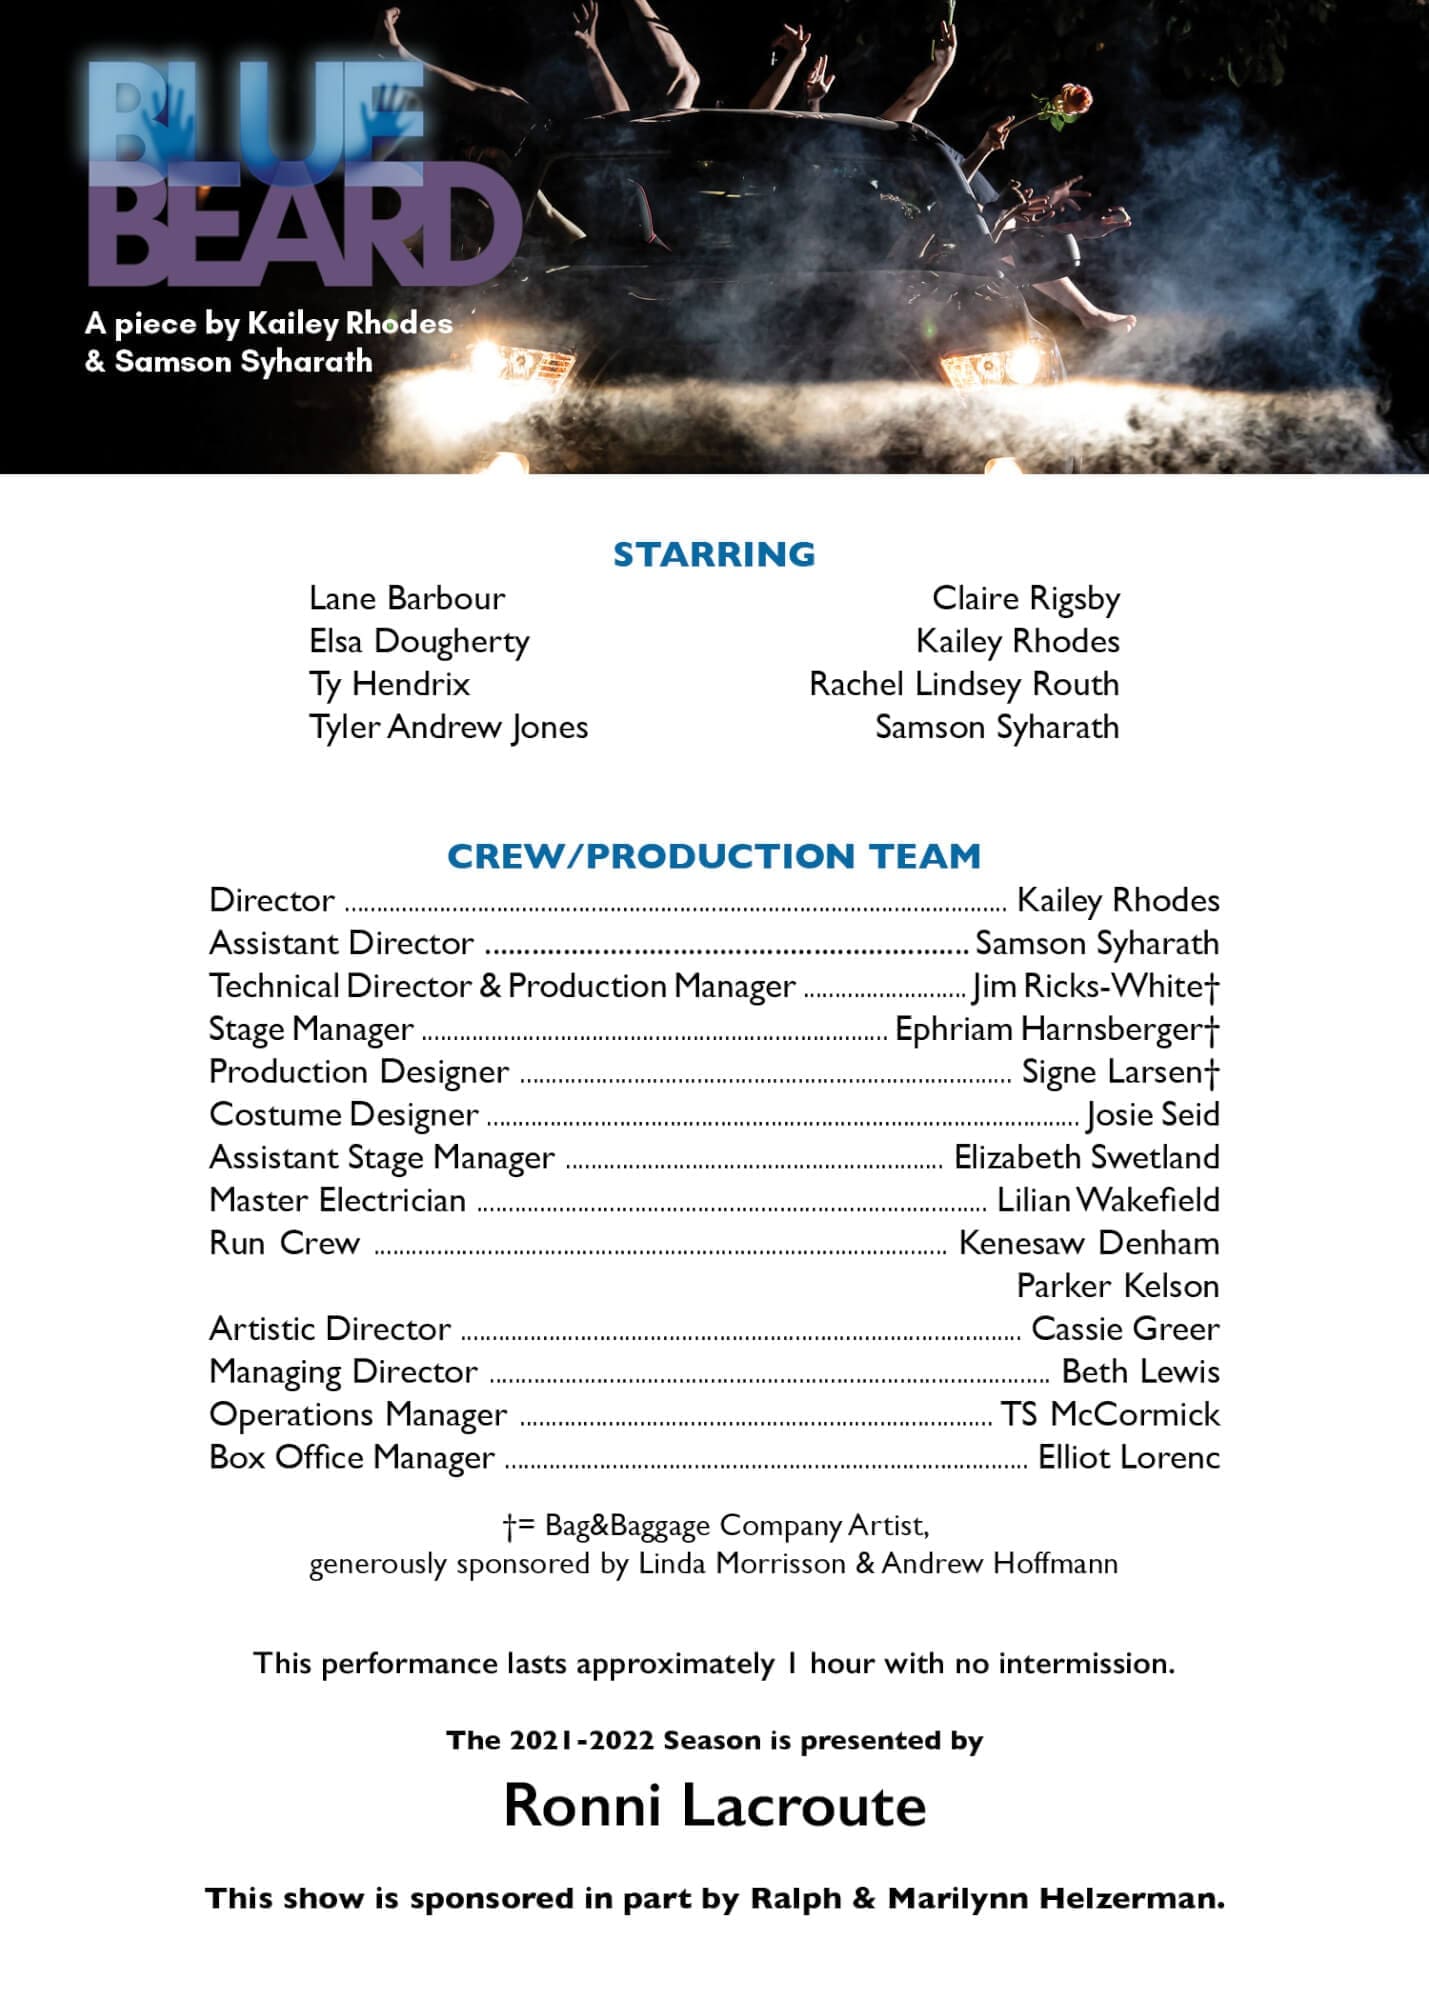 An image of a Playbill Card - On the top rests the Bluebeard Logo followed by the text "A piece by Kailey Rhodes and Samson Syharath" all of this is overlayed on a hazy image of a car with limbs sticking out of the back. Below the image of the car the text reads "Starring" in blue, followed by the names of the cast: Lane Barbour, Claire Rigsby, Elsa Dougherty, Kailey Rhodes, Ty Hendrix, Rachel Lindsey Routh, Tyler Andrew Jones, Samson Syharath" Below this text another set of blue text reading, "Crew/Production Team" followed by the names of the crew and production team: Director - Kailey Rhodes, Assistant Director - Samson Syharath, Technical Director & Production Manager - Jim Ricks-White, Stage Manager - Ephriam Harnsberger, Production Designer - Signe Larsen, Costume Designer - Josie Seid, Assistant Stage Manager - Elizabeth Swetland, Master Electrician - Lilian Wakefield, Run Crew - Kenesaw Denham and Parker Kelson, Artistic Director - Cassie Greer, manager Director - Beth Lewis, Operations Manager - TS McCormick, Box Office Manager - Elliot Lorenc" Following these lists is the remaining text, "generously sponsored by Linda Morrison & Andrew Hoffmann. This performance lasts approximately 1 hour with no intermission. The 2021-2022 Season is presented by Ronni Lacroute. This show is sponsored in part by Ralph & Marilynn Helzerman." END OF DESCRIPTION